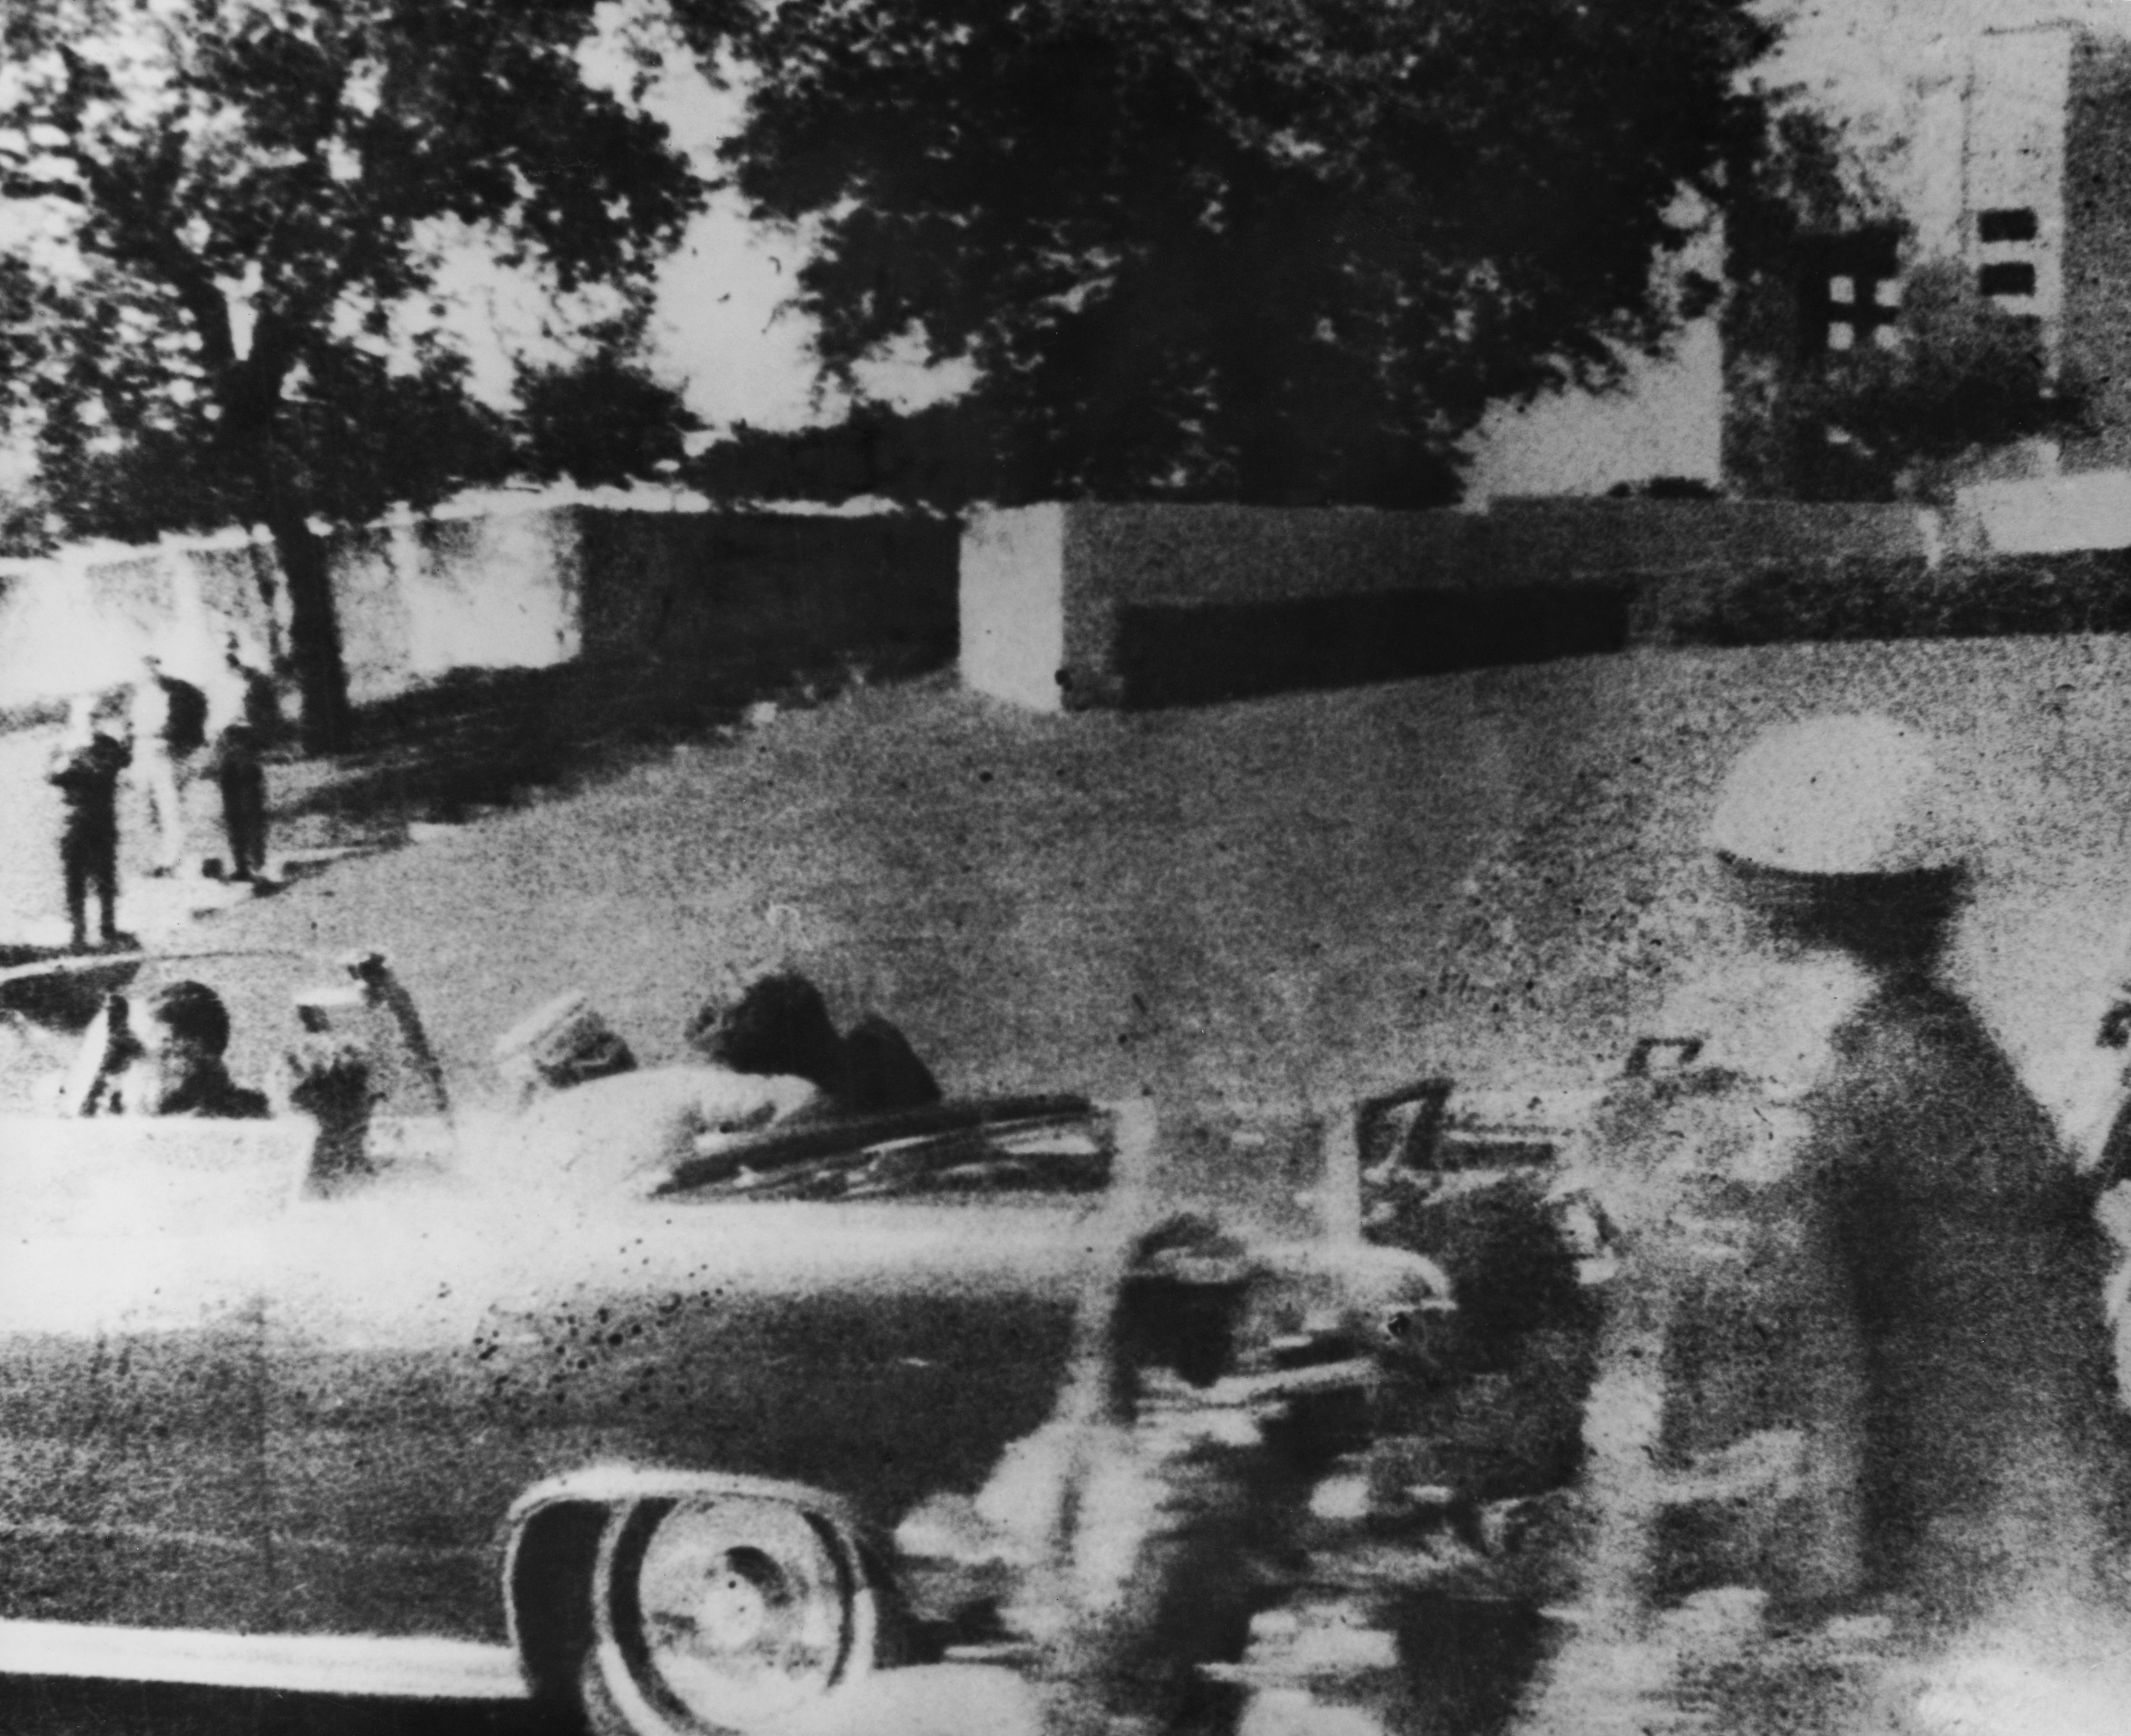 American president John F. Kennedy (1917 - 1963) is struck by an assassin's bullet as he travels through Dallas in a motorcade November, 22 1963. In the car next to him is his wife Jacqueline (1929 - 1994) and in the front seat is Texas governor John Connally. (Credit: Three Lions/Hulton Archive/Getty Images) 